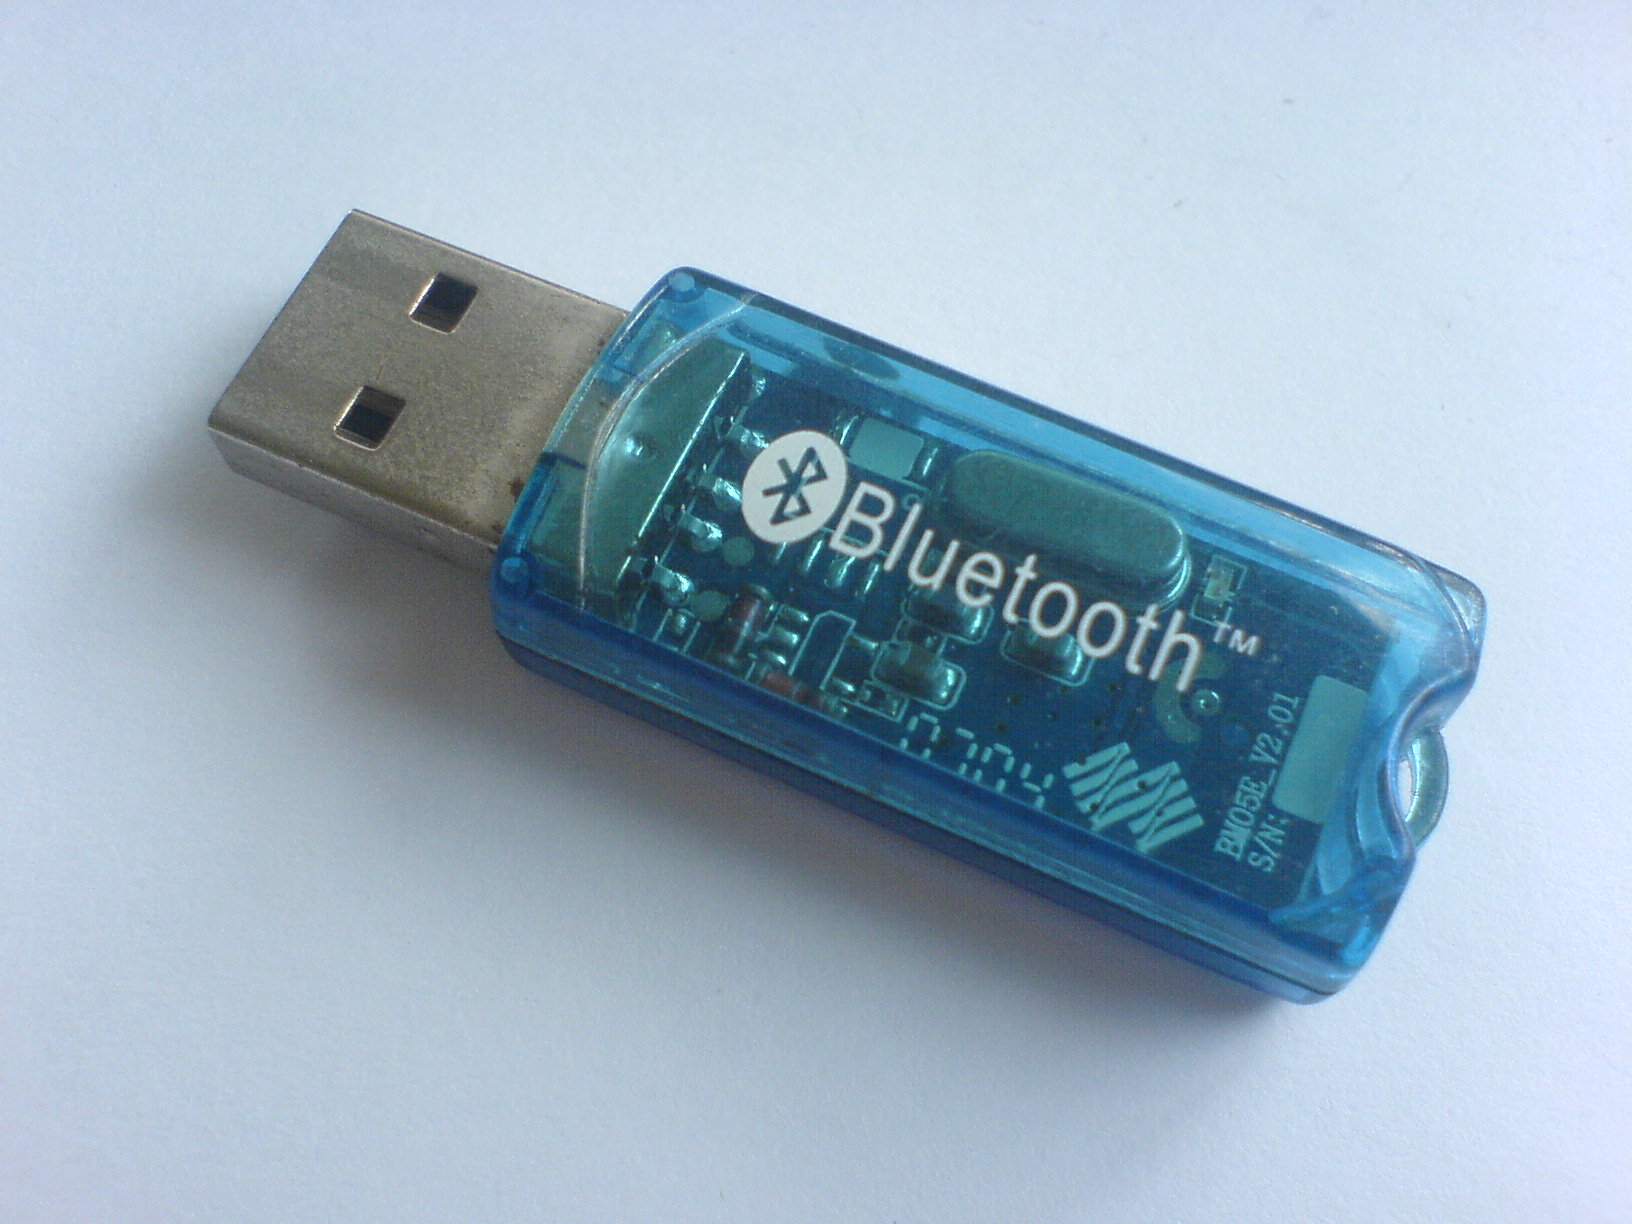 Bluetooth Device Driver Software Free Download For Windows 7